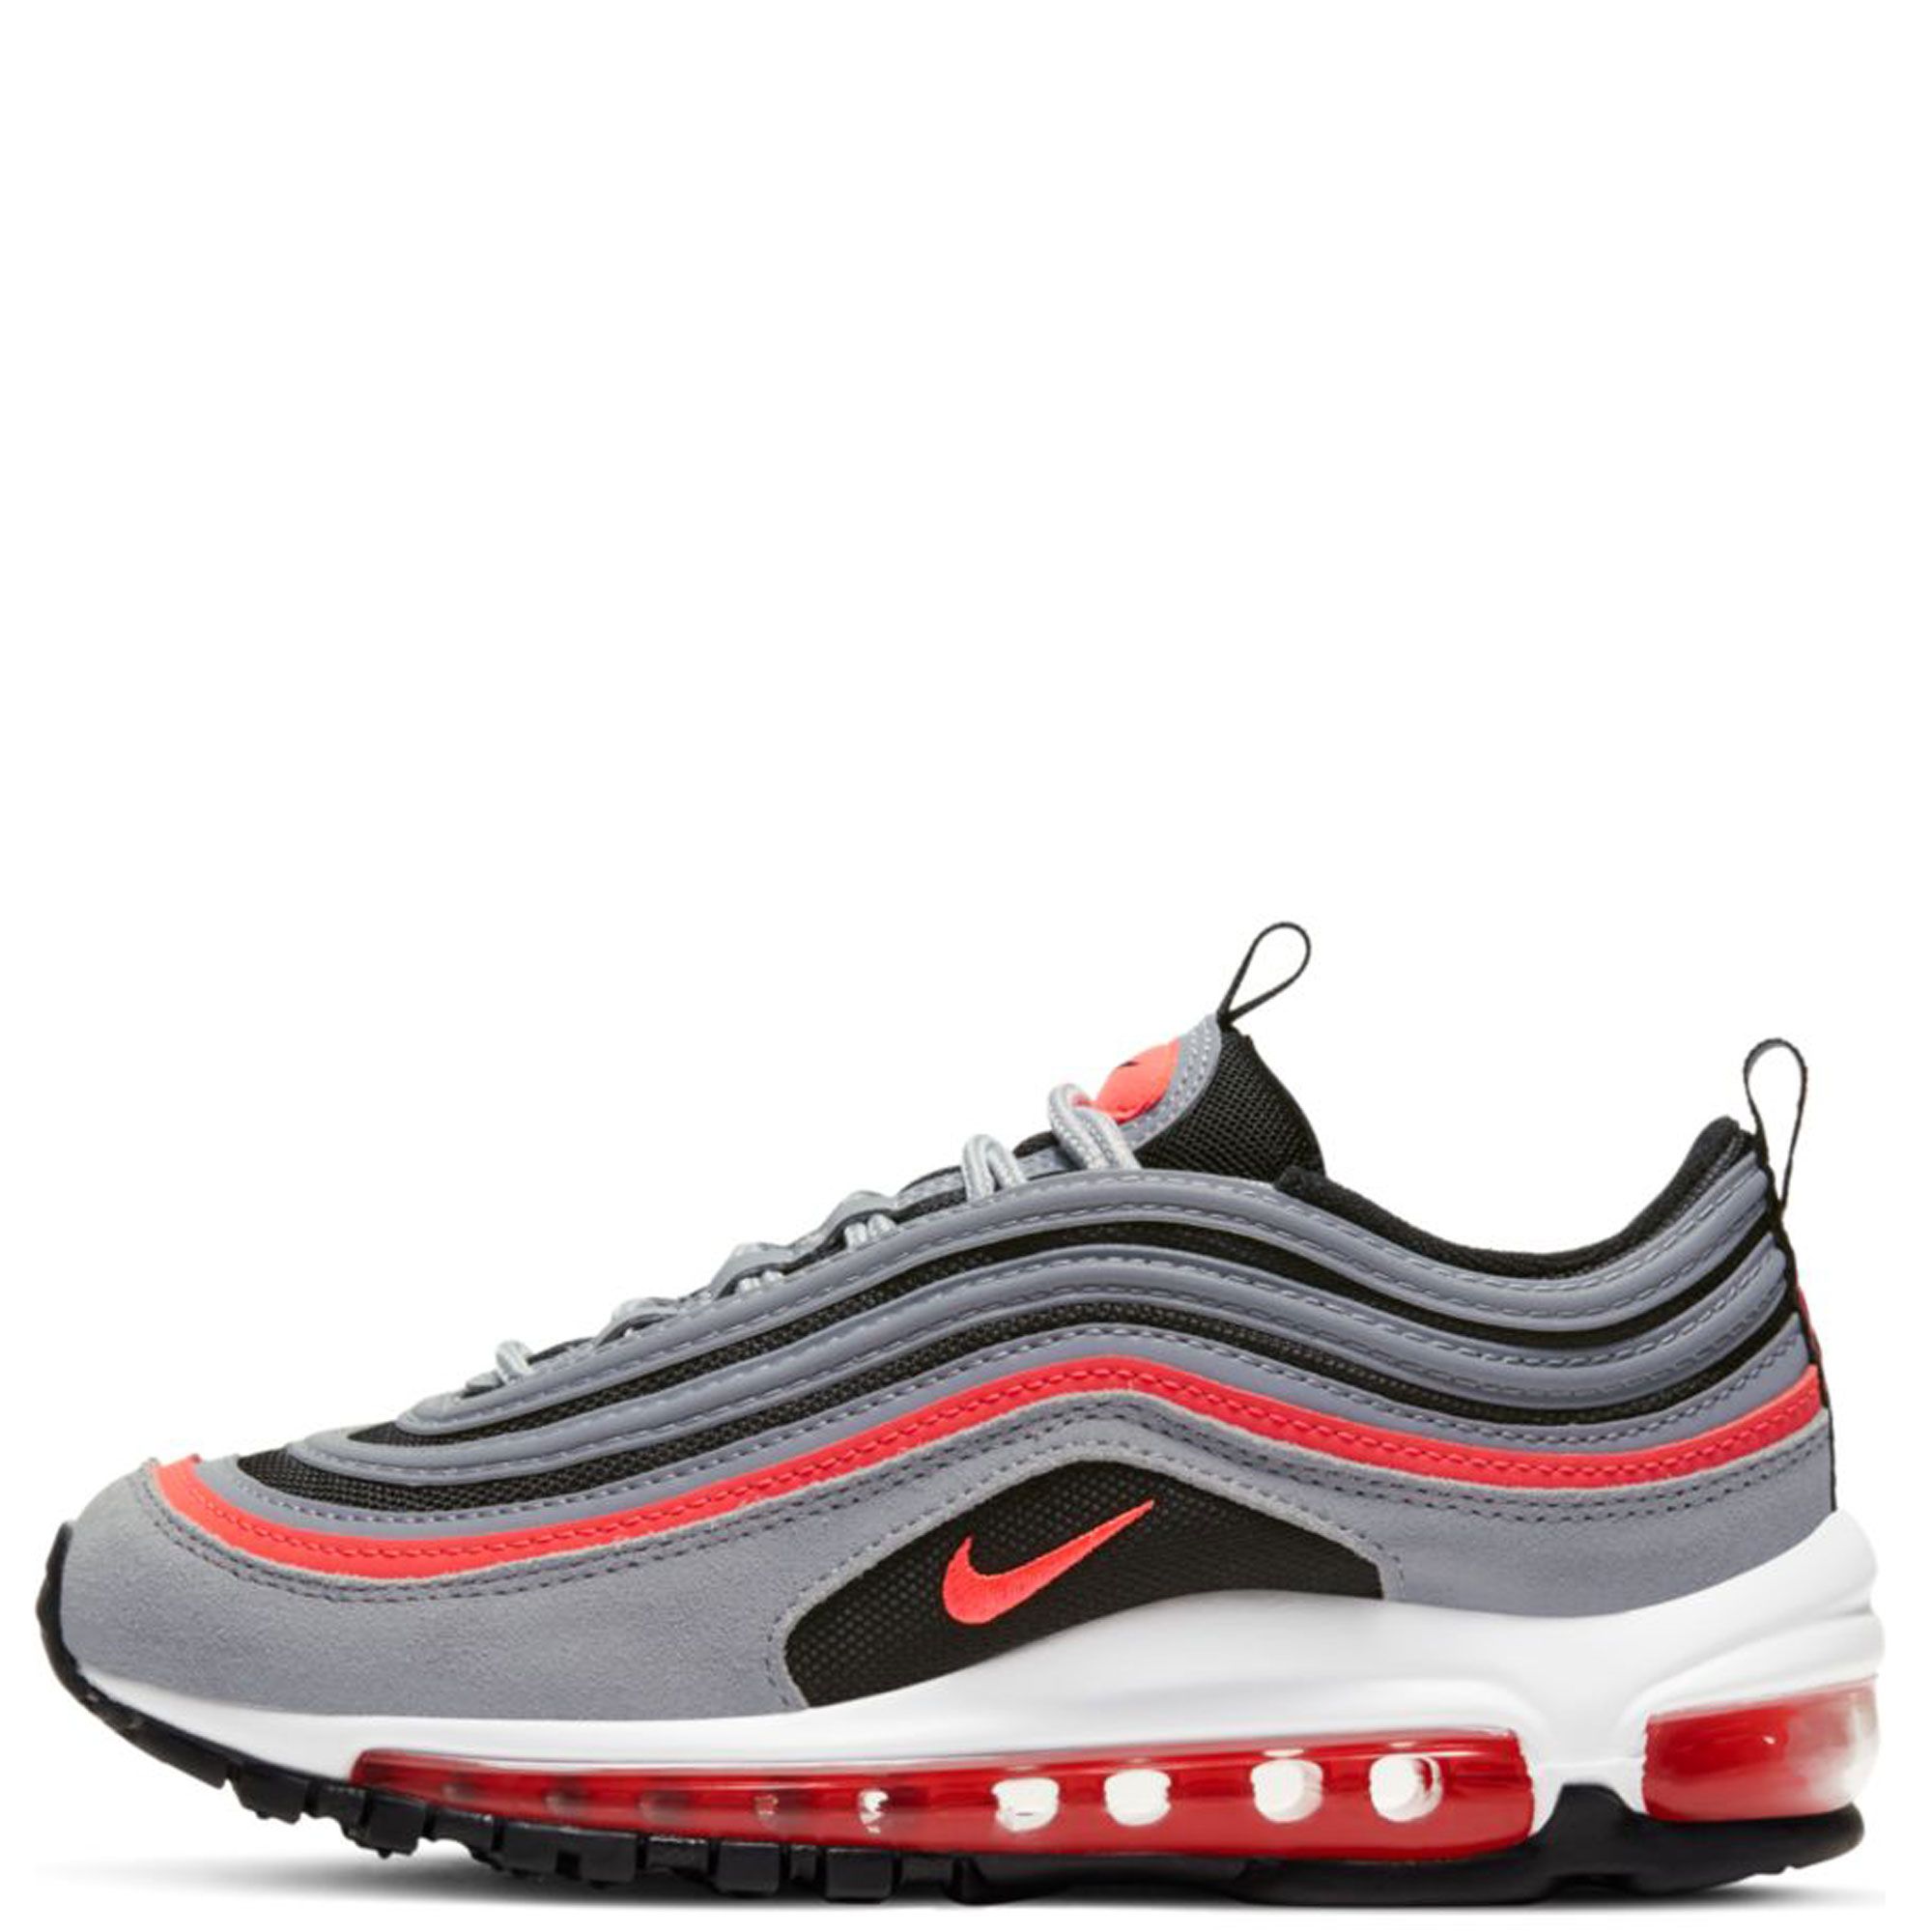 air max 97 red white grey